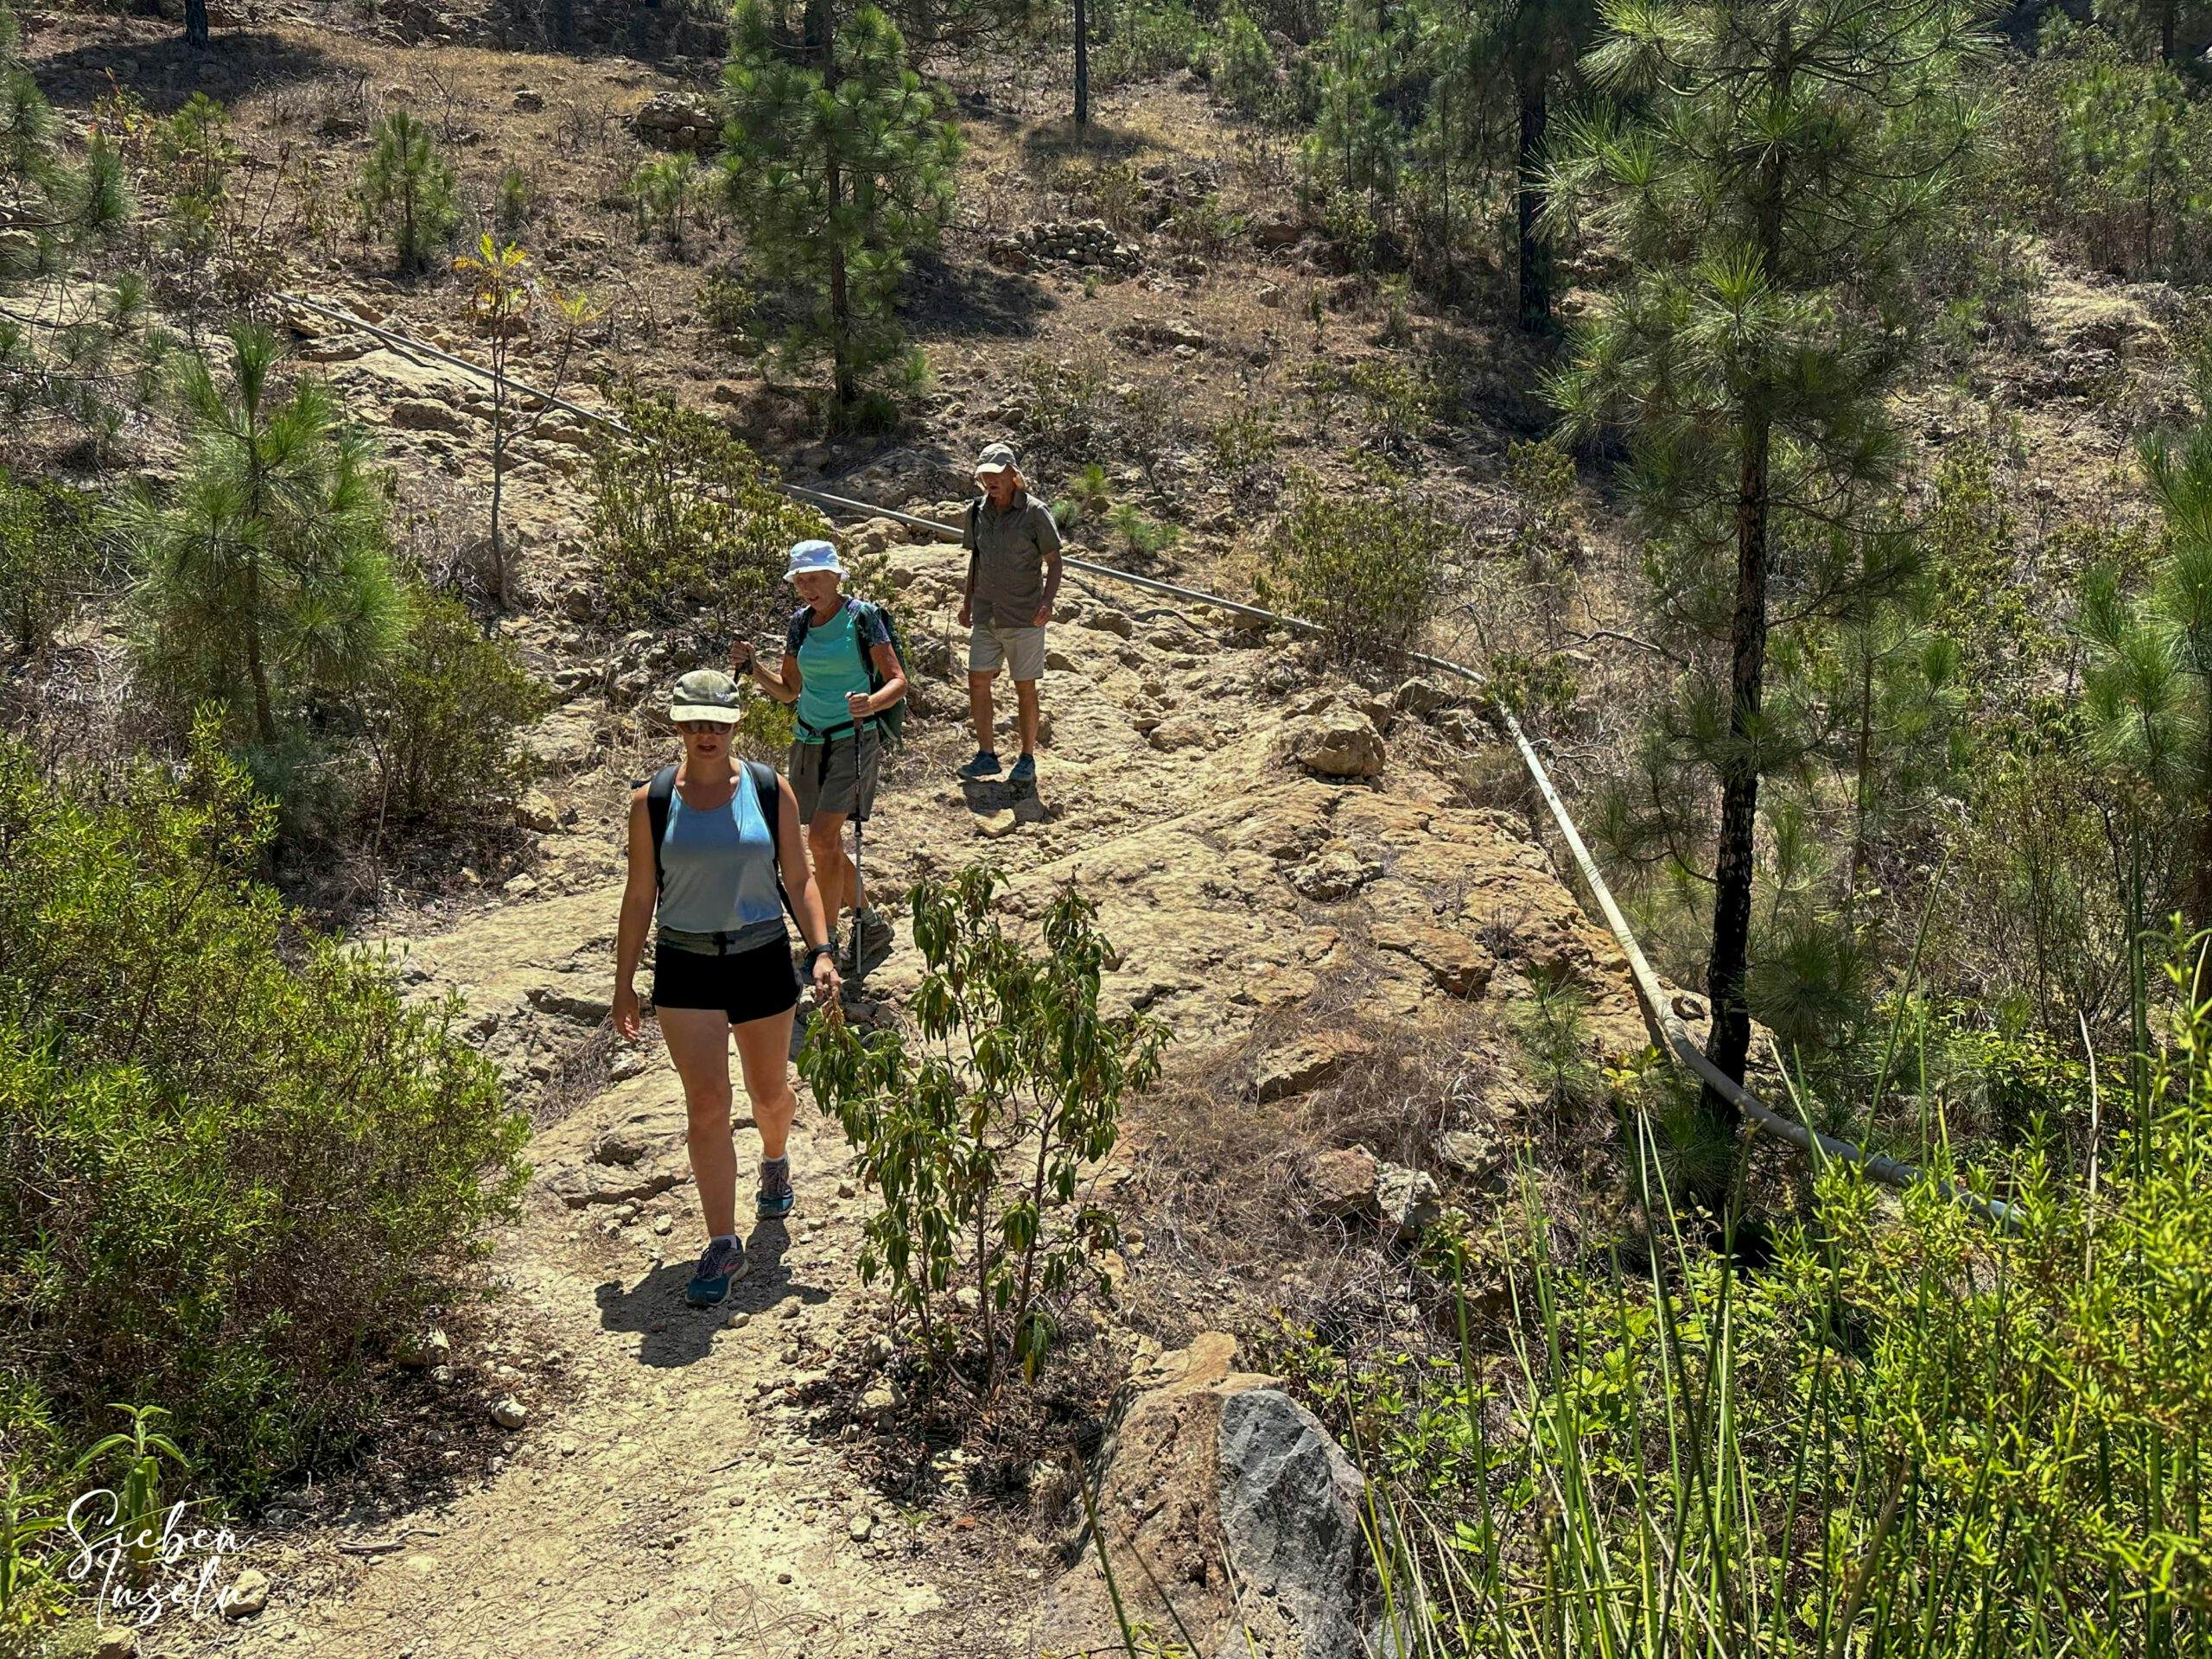 Hikers on the way back from Casa de Teresme to La Quinta